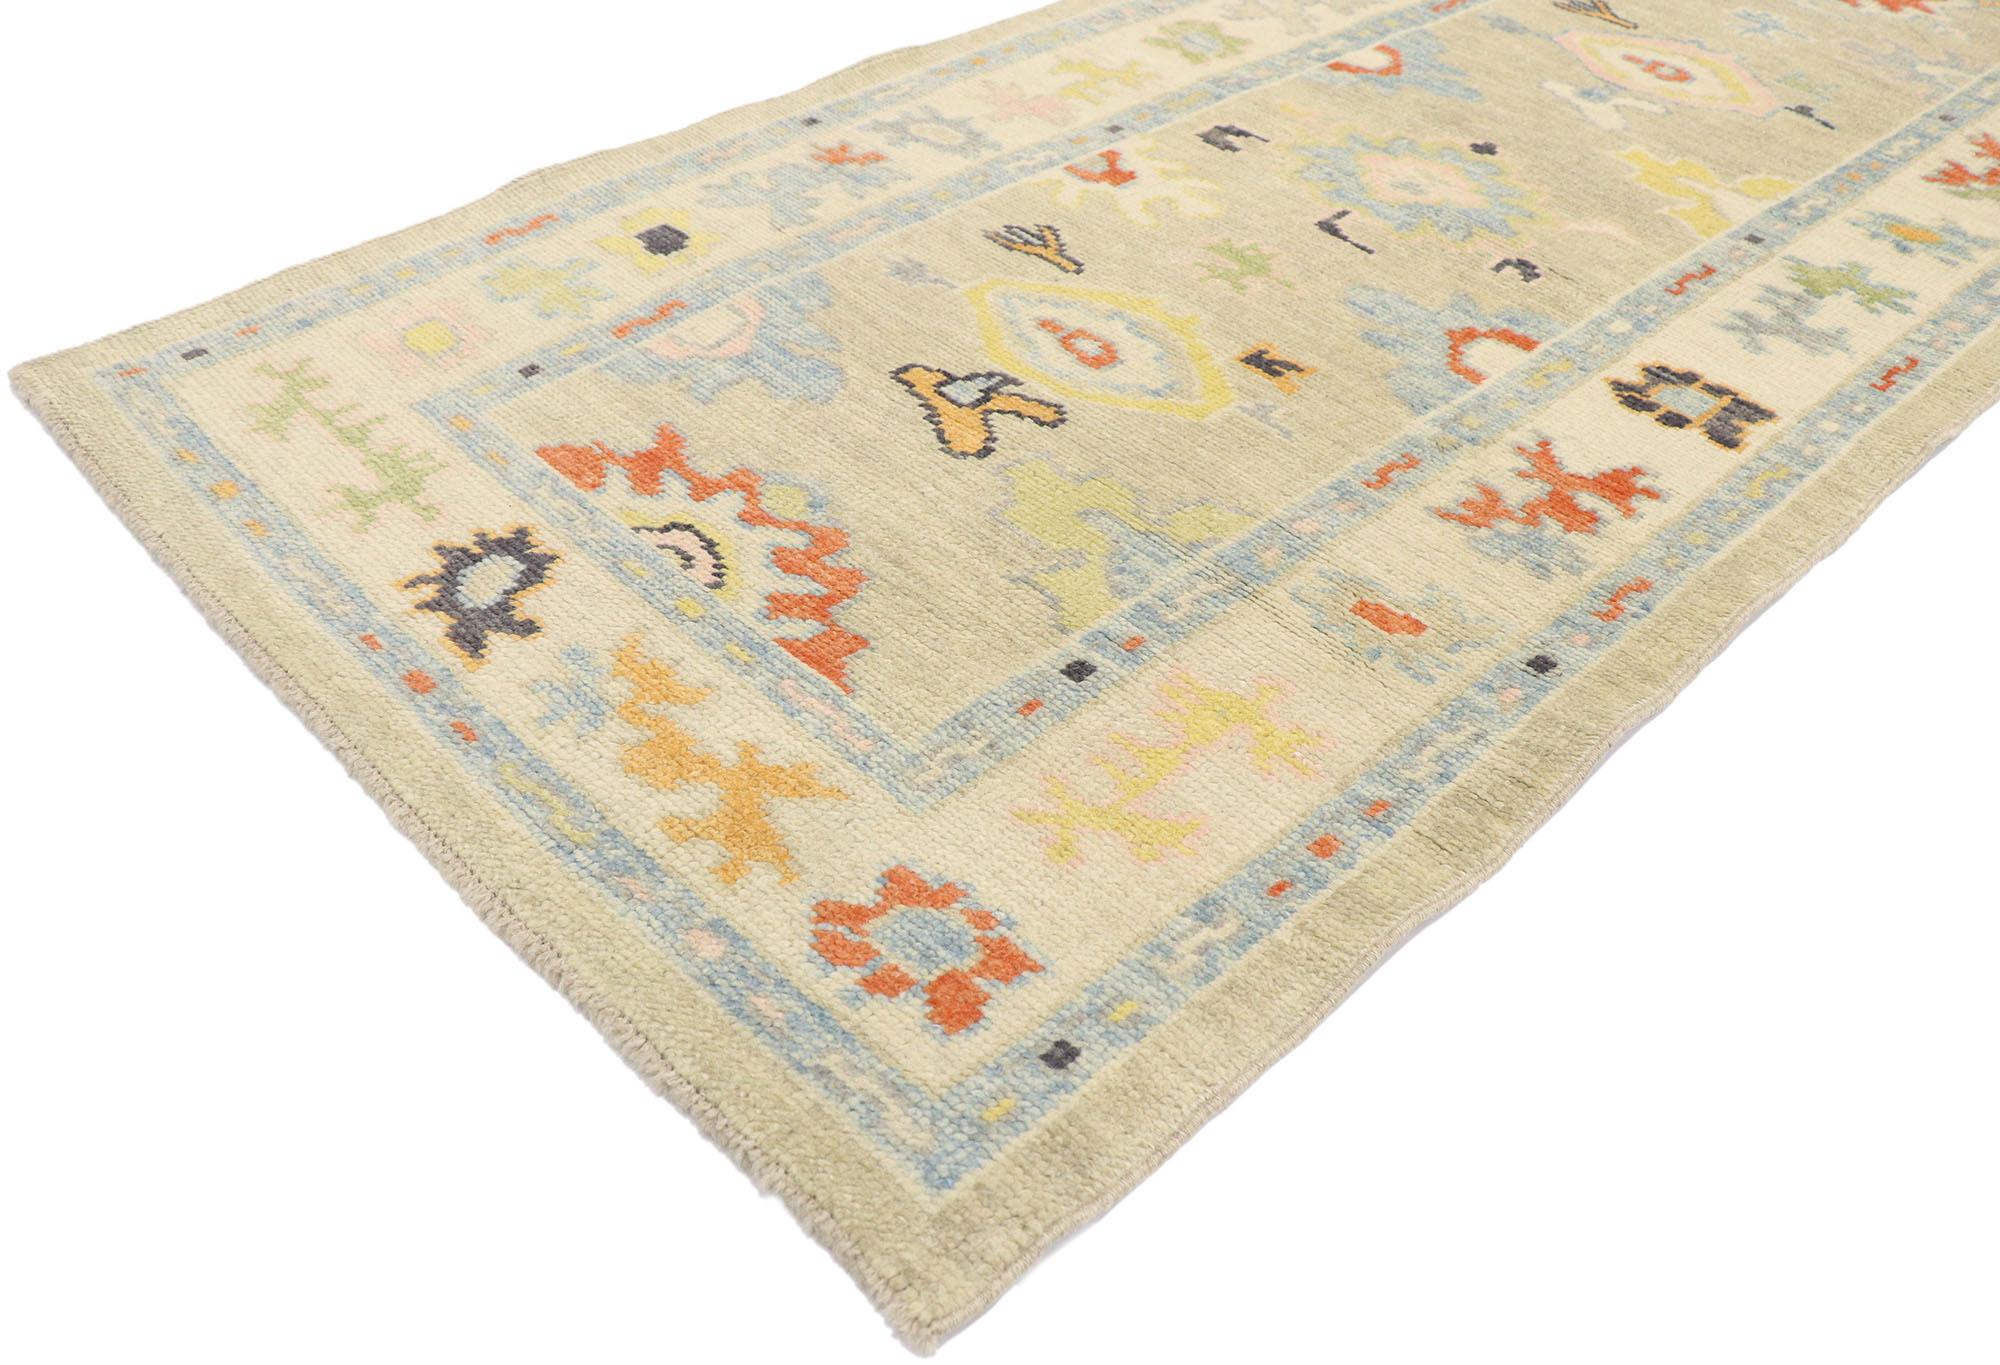 53543 new contemporary Turkish oushak Runner with transitional modern style 03'00 x 15'08. Blending elements from the modern world with vibrant colors, this hand knotted wool contemporary Turkish Oushak runner will boost the coziness factor in